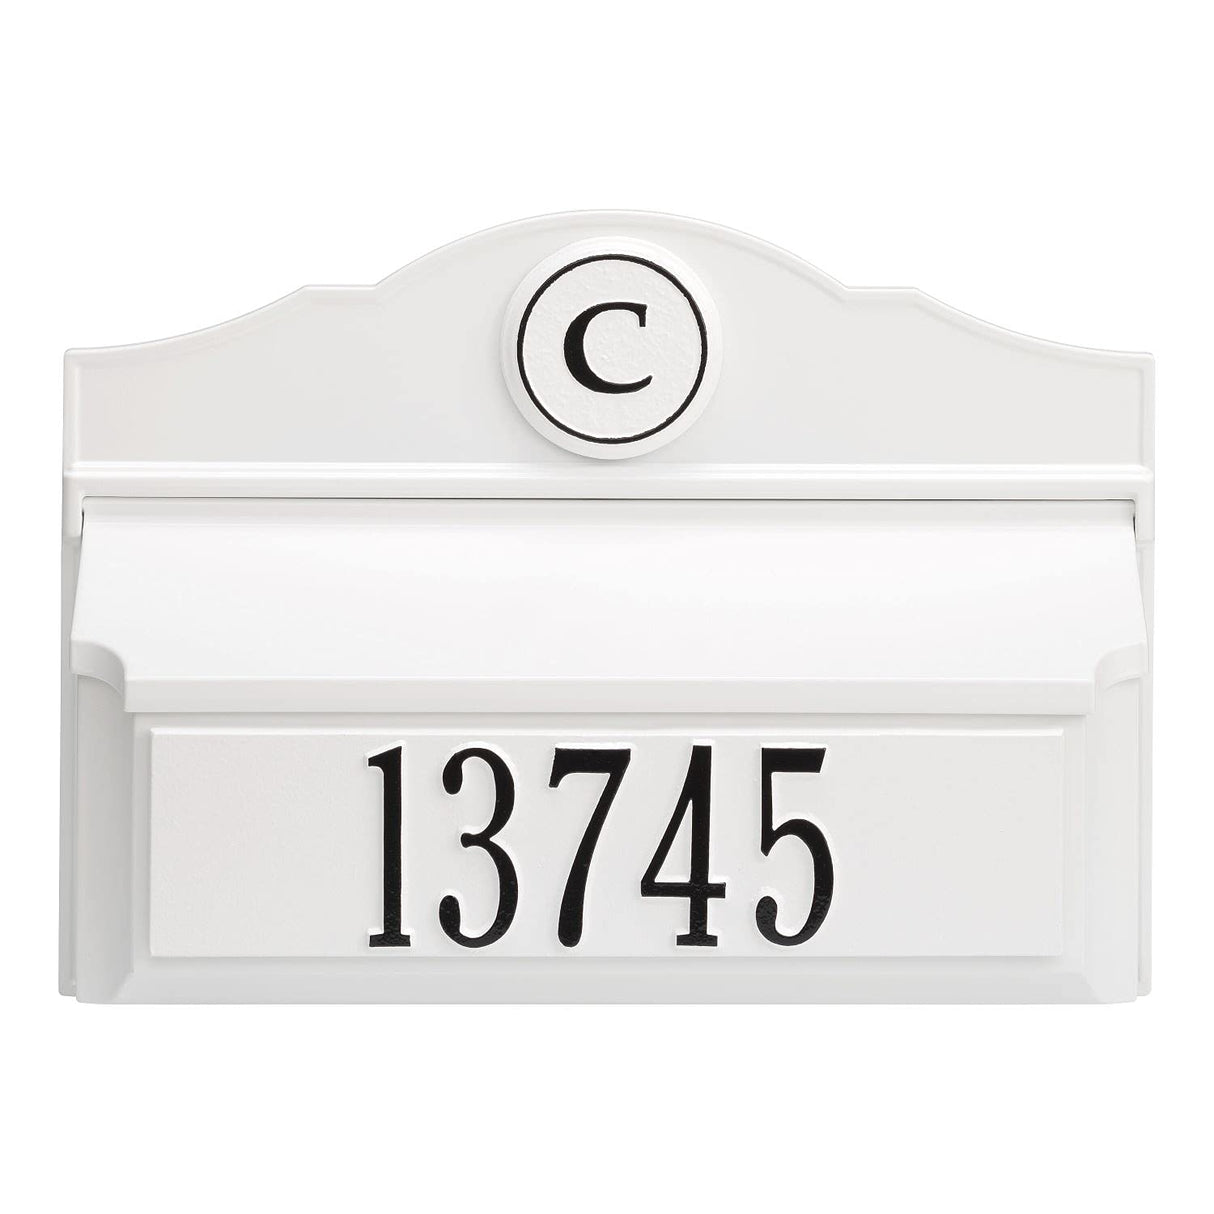 Whitehall 11251 - Colonial Wall Mailbox Package #1 (Mailbox, Plaque & Monogram)